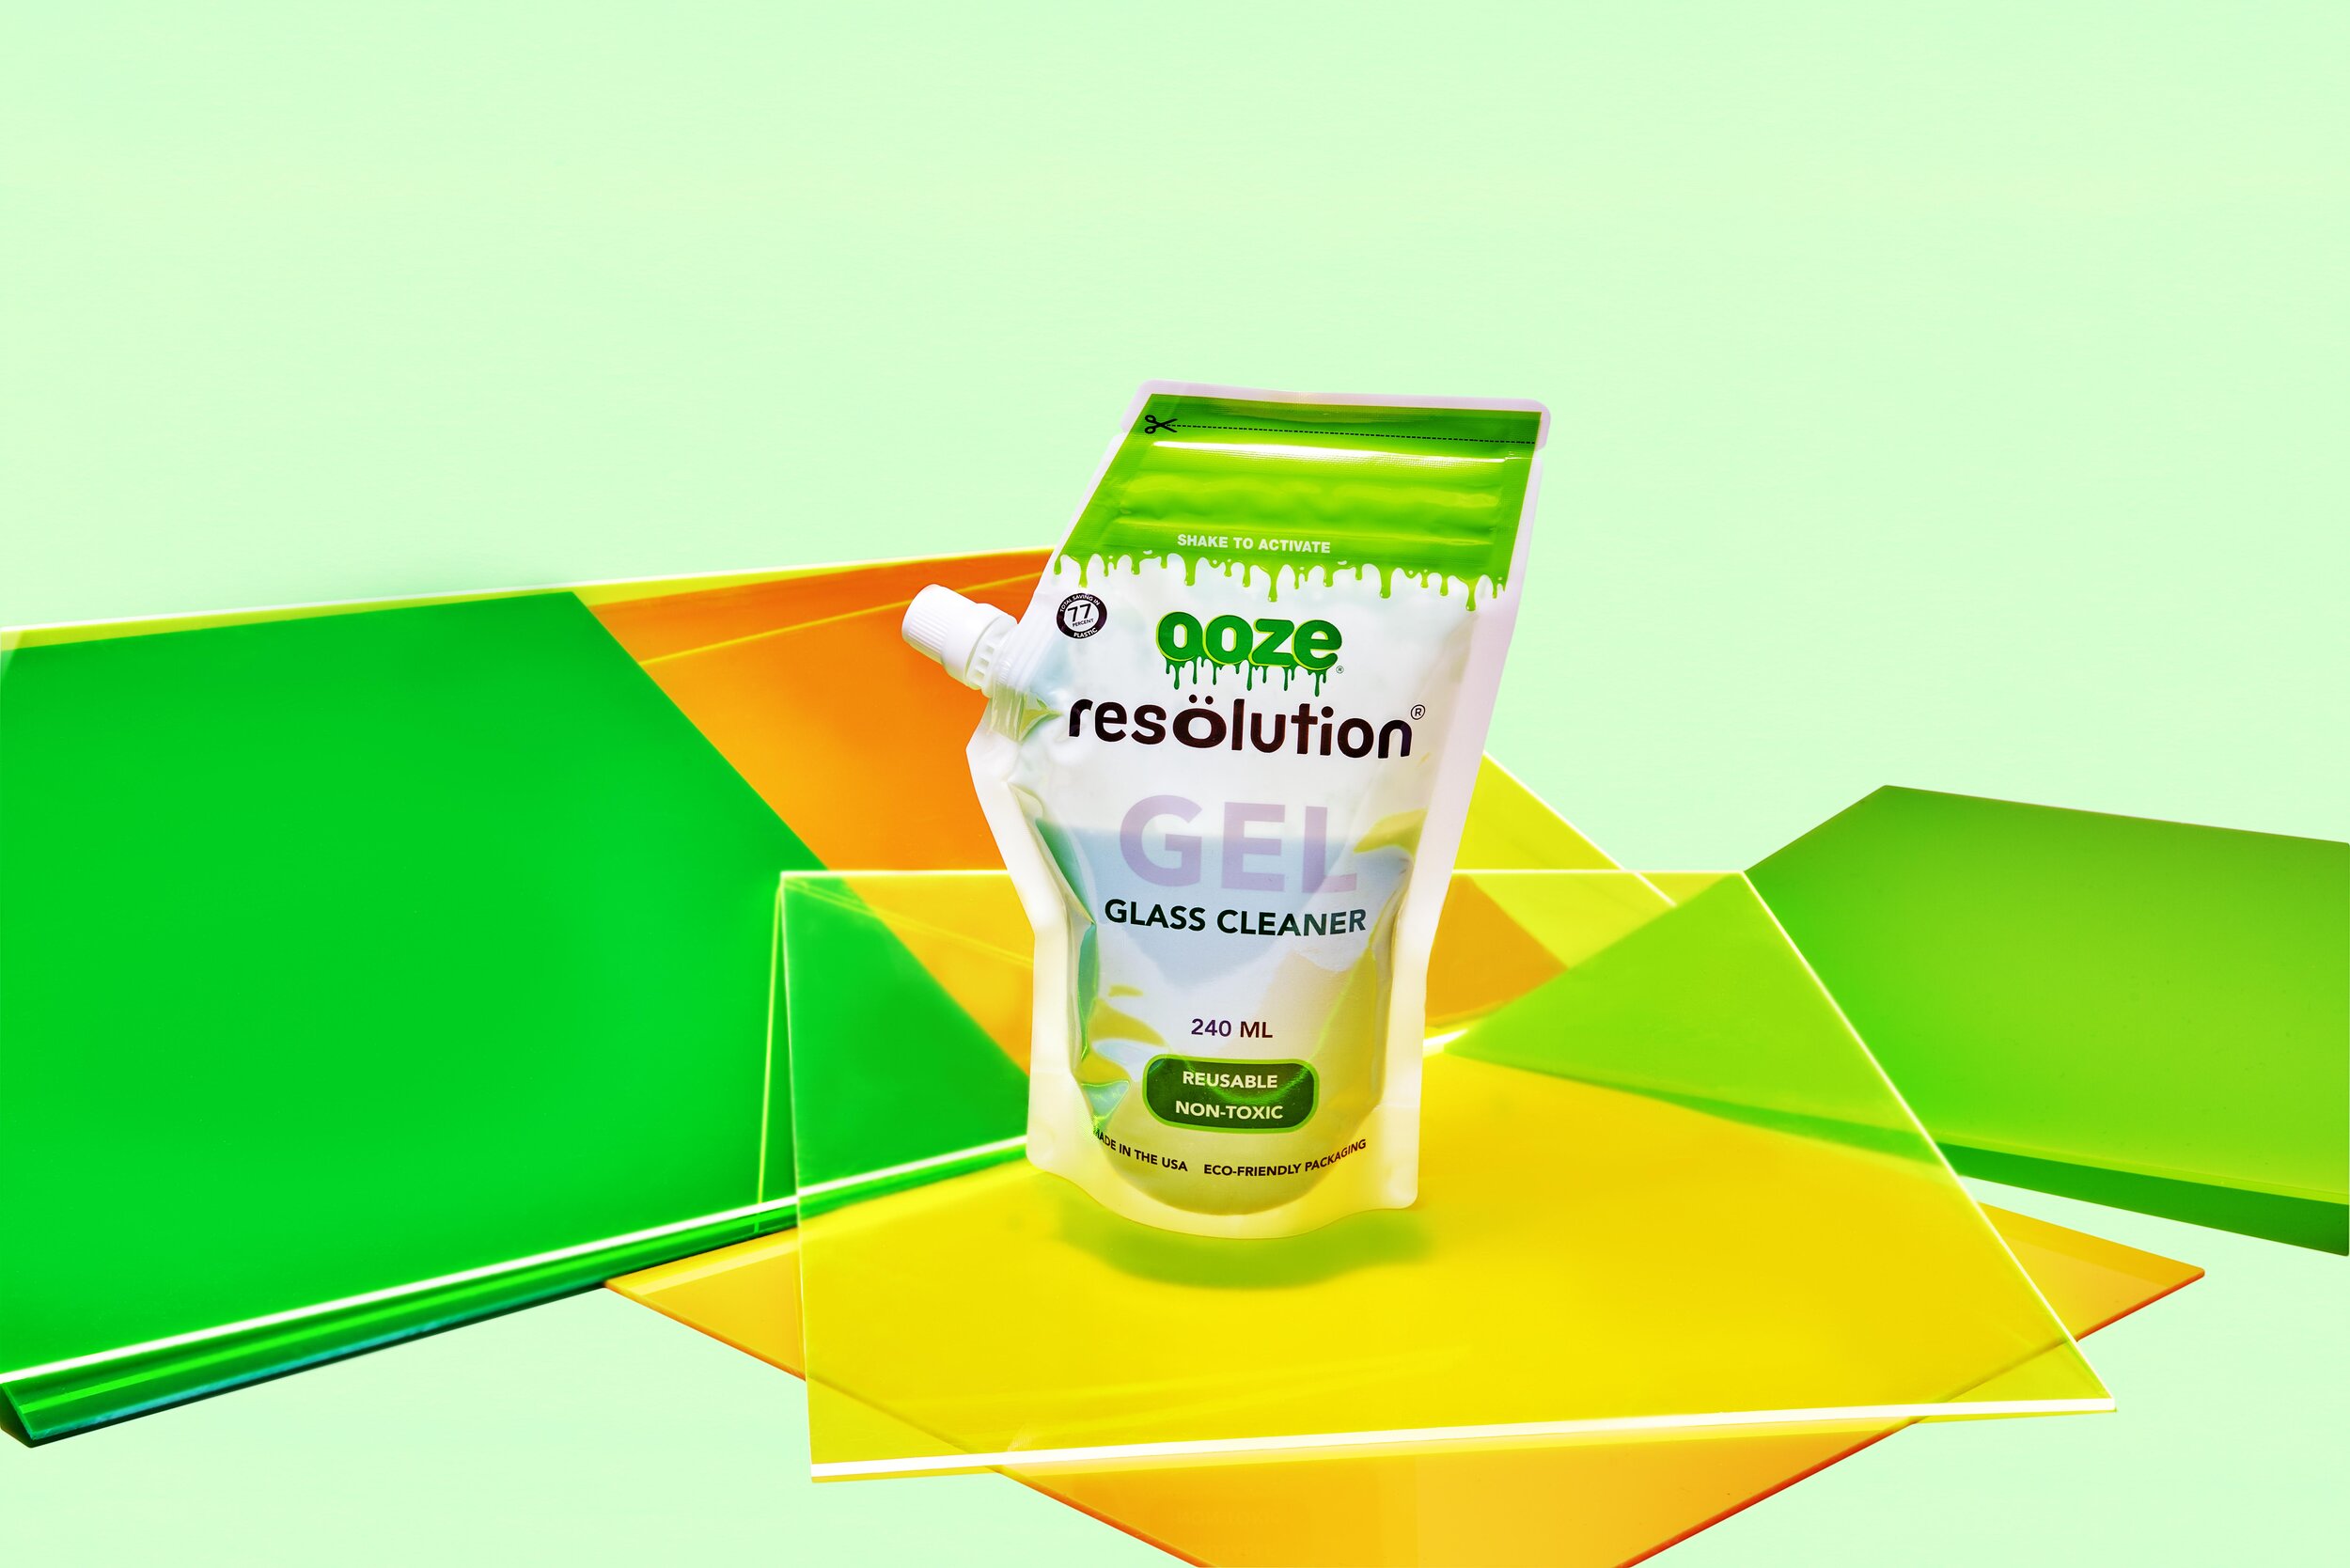 Ooze Resolution Green Res Gel Reusable Glass Cleaning Solution